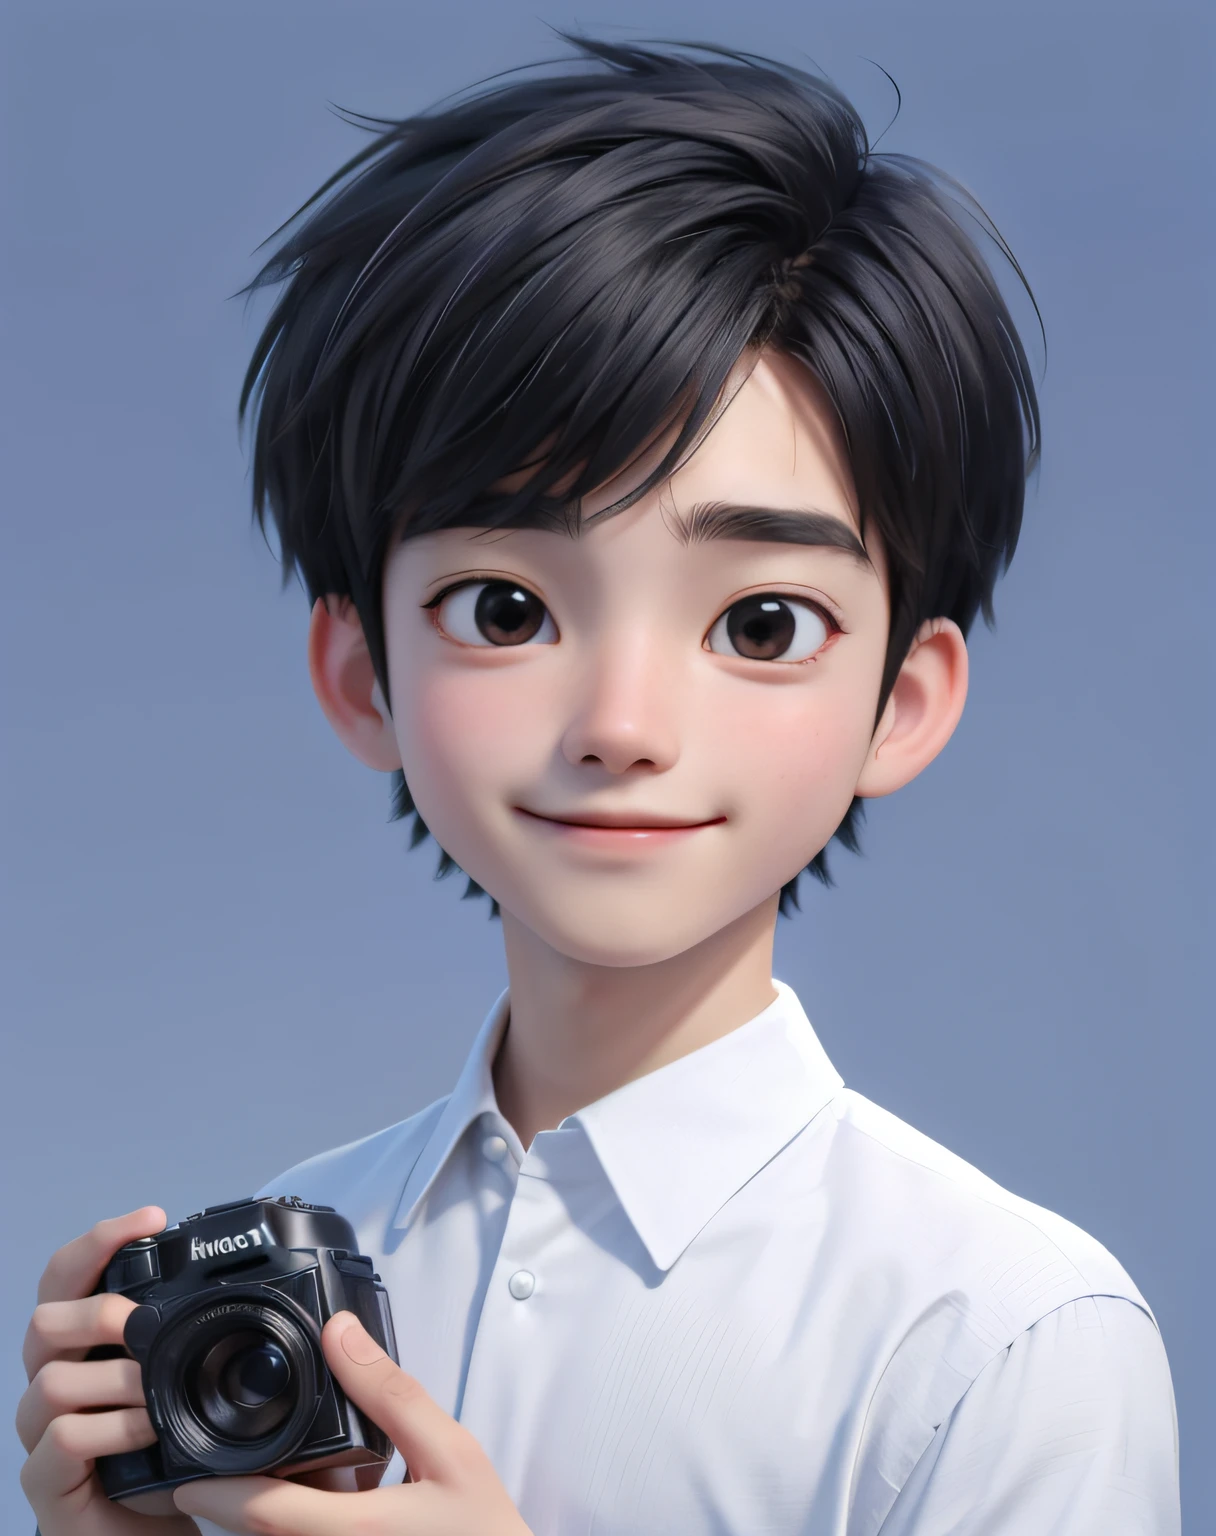 best quality, 25 years old, alone, cartoon portrait, with a short beard, the background is a room with a film set, short hair, Boy holding the camera in the air taking pictures, with a beard on his face